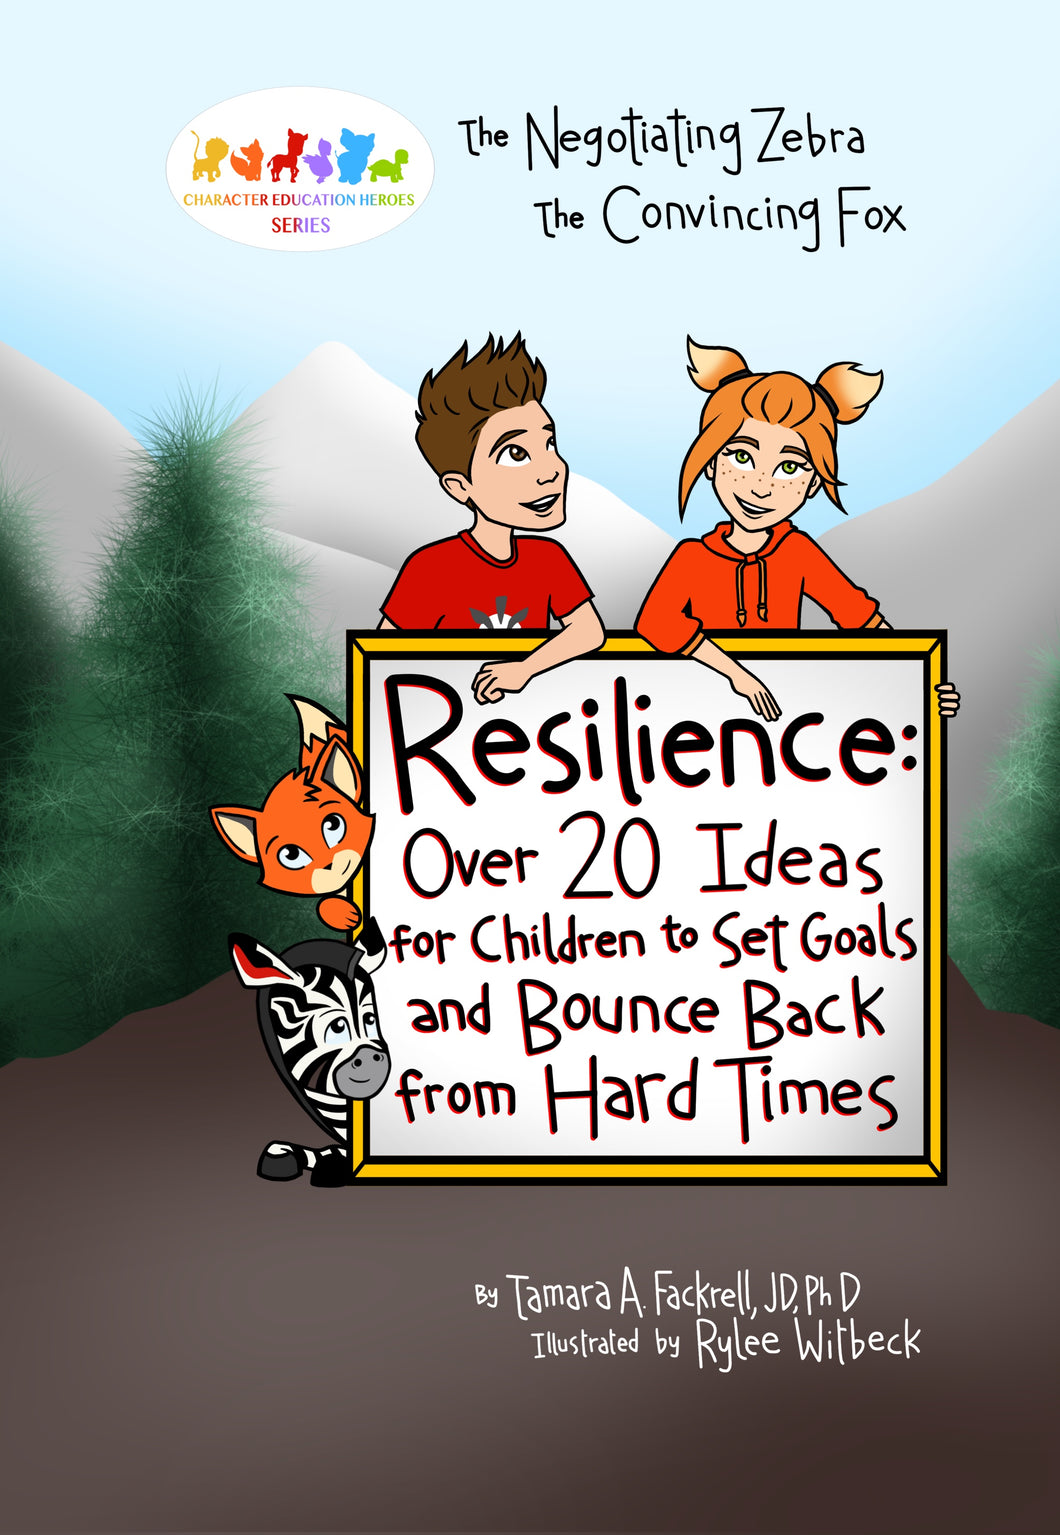 13: Paperback Book: Resilience: Over 20 Ideas for Children to Set Goals and Bounce Back from Hard Times (Paperback)